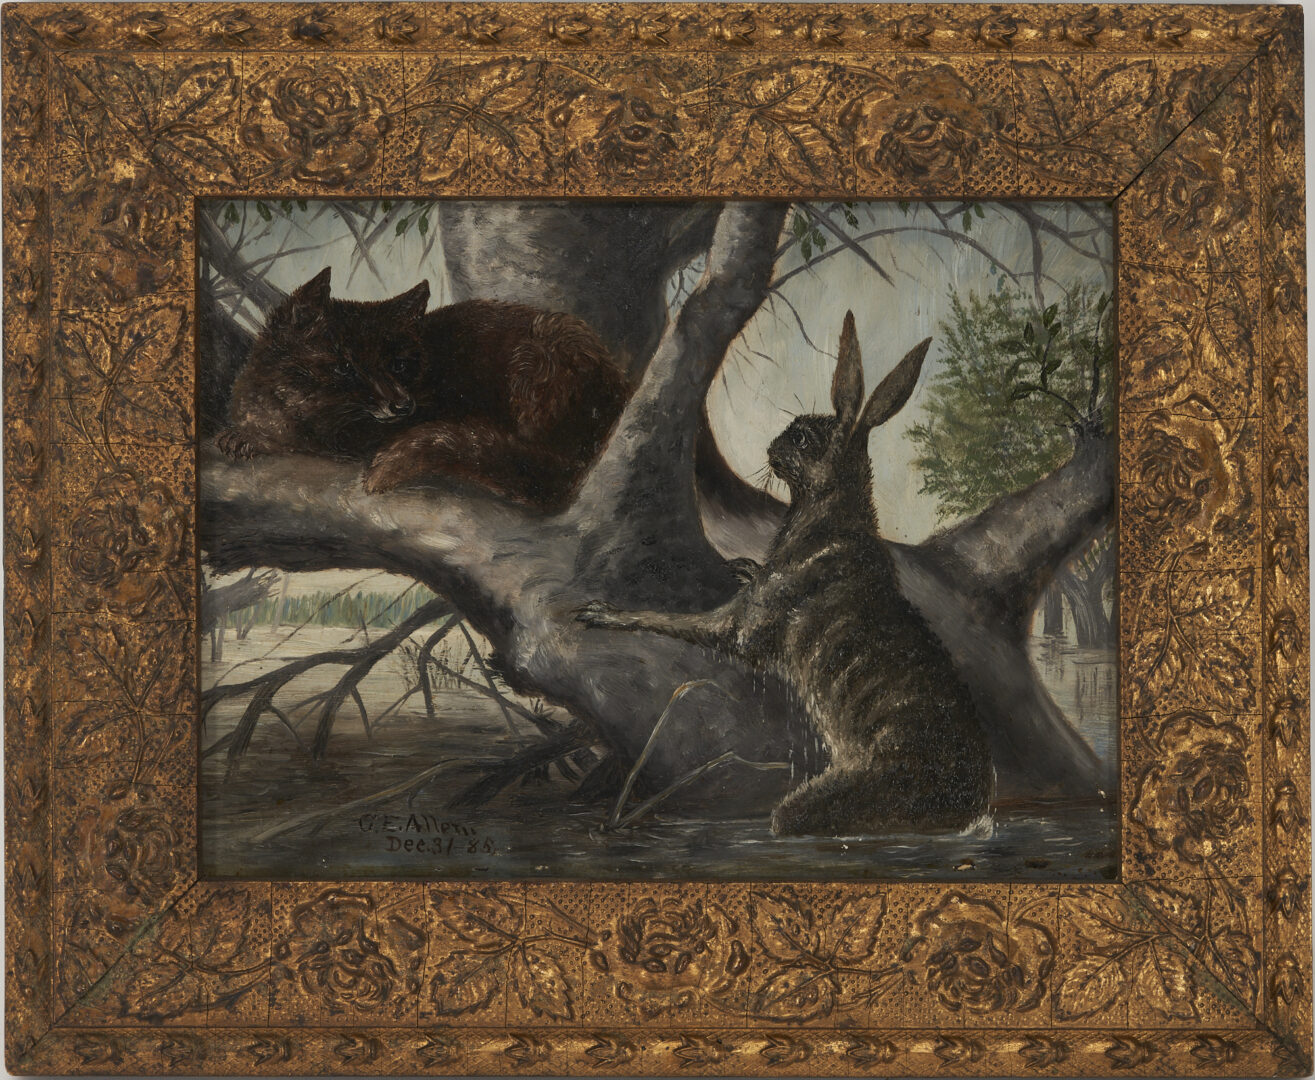 Lot 635: Rabbit and Fox During a Flood O/B Painting, after Ludwig Beckmann, 1885